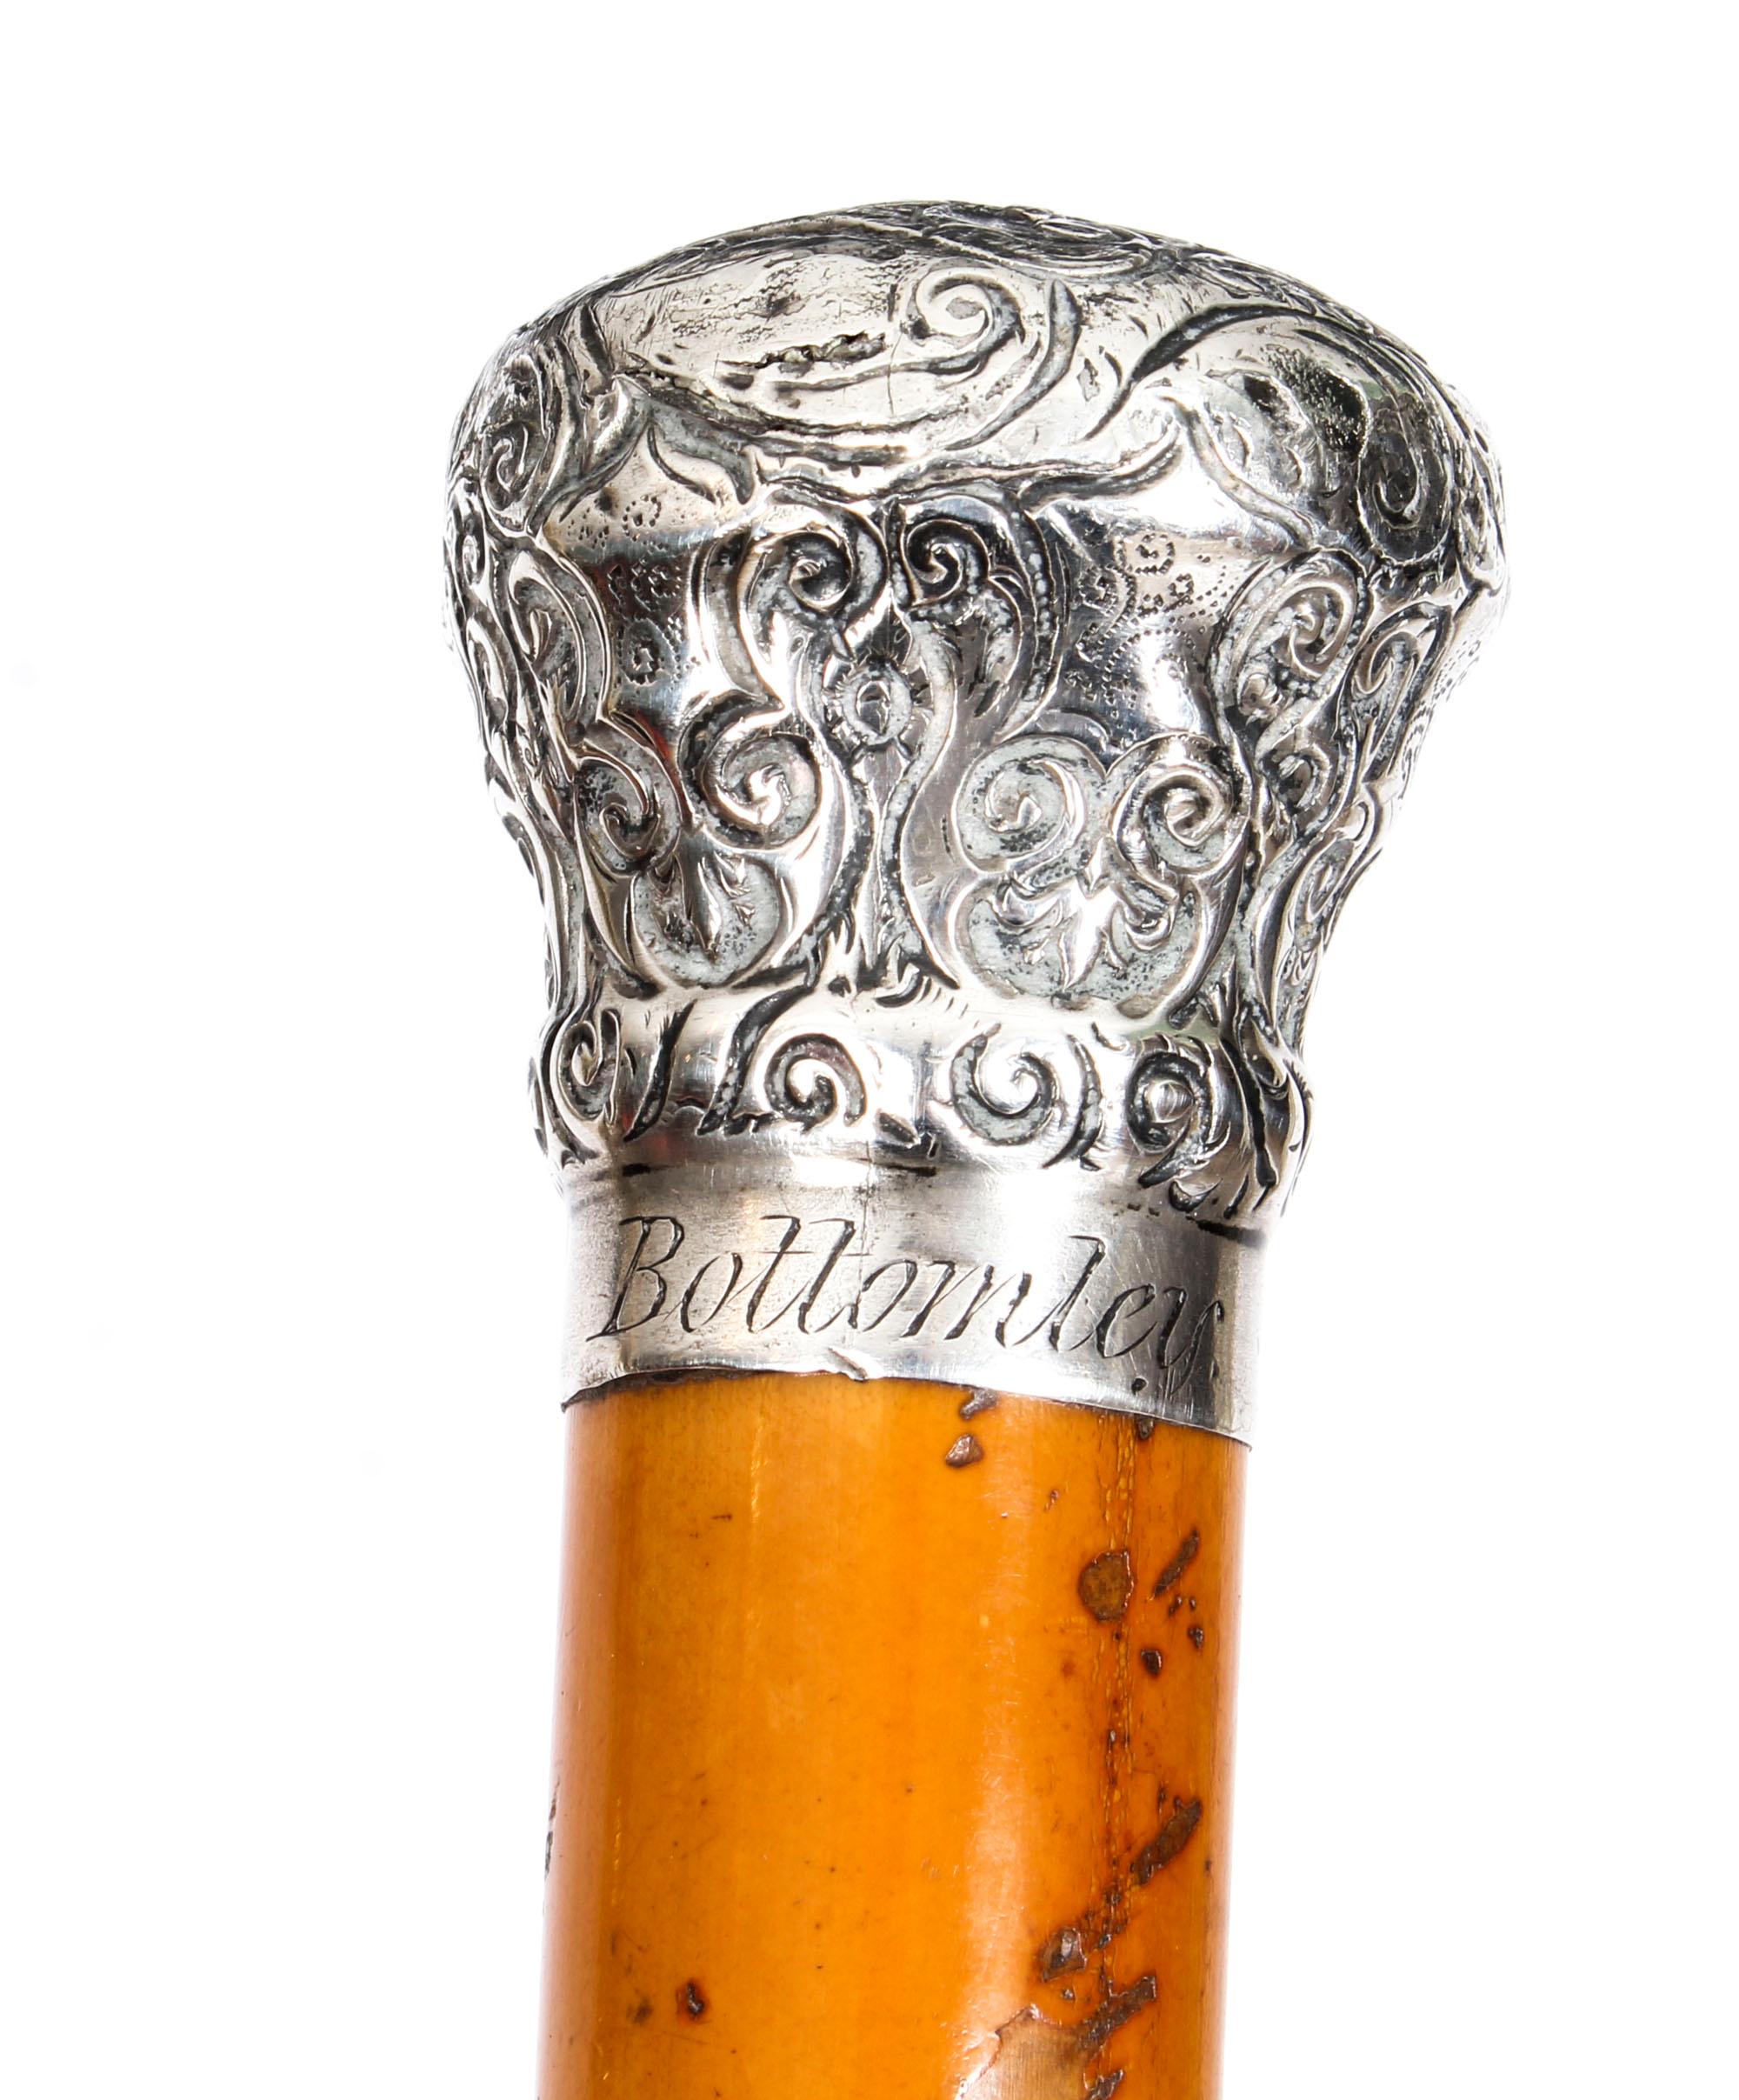 This is a superb continental sterling silver-mounted Malacca walking stick, circa 1880 in date. 

This decorative walking cane features a splendid globular sterling silver pommel which is cast with exquisitely detailed floral and foliate